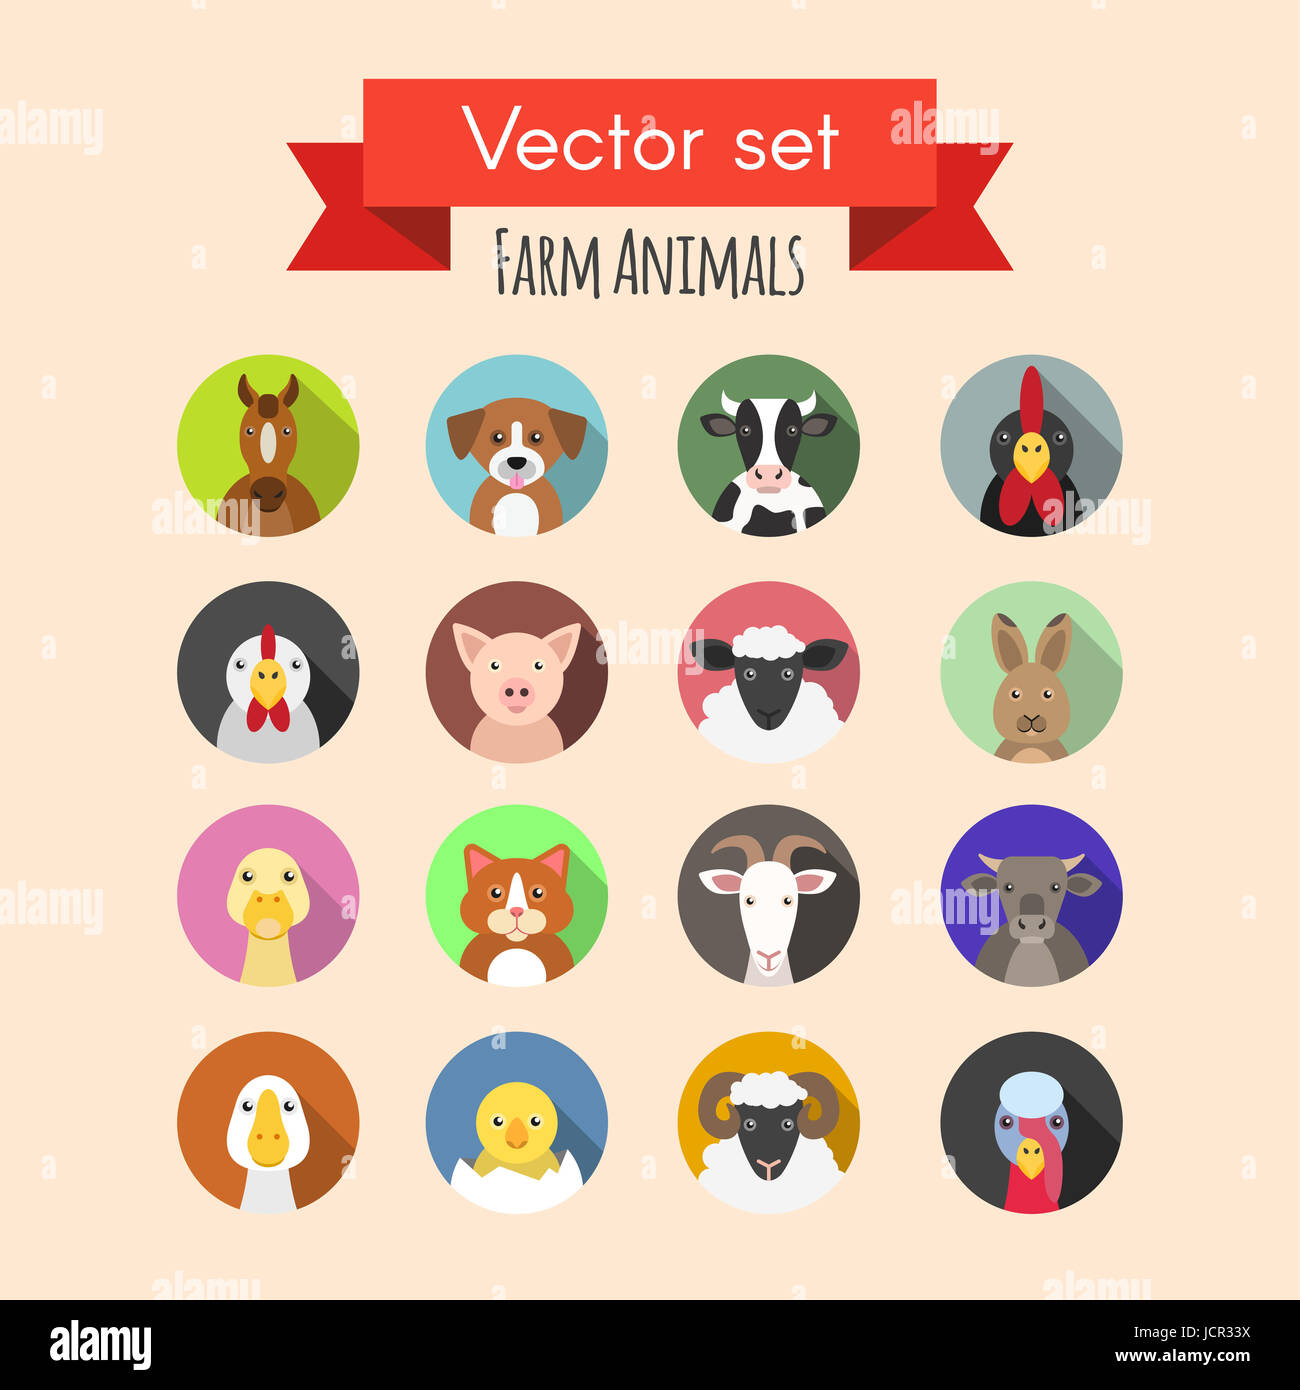 Vector set of farm or domestic funny animals icons Stock Photo